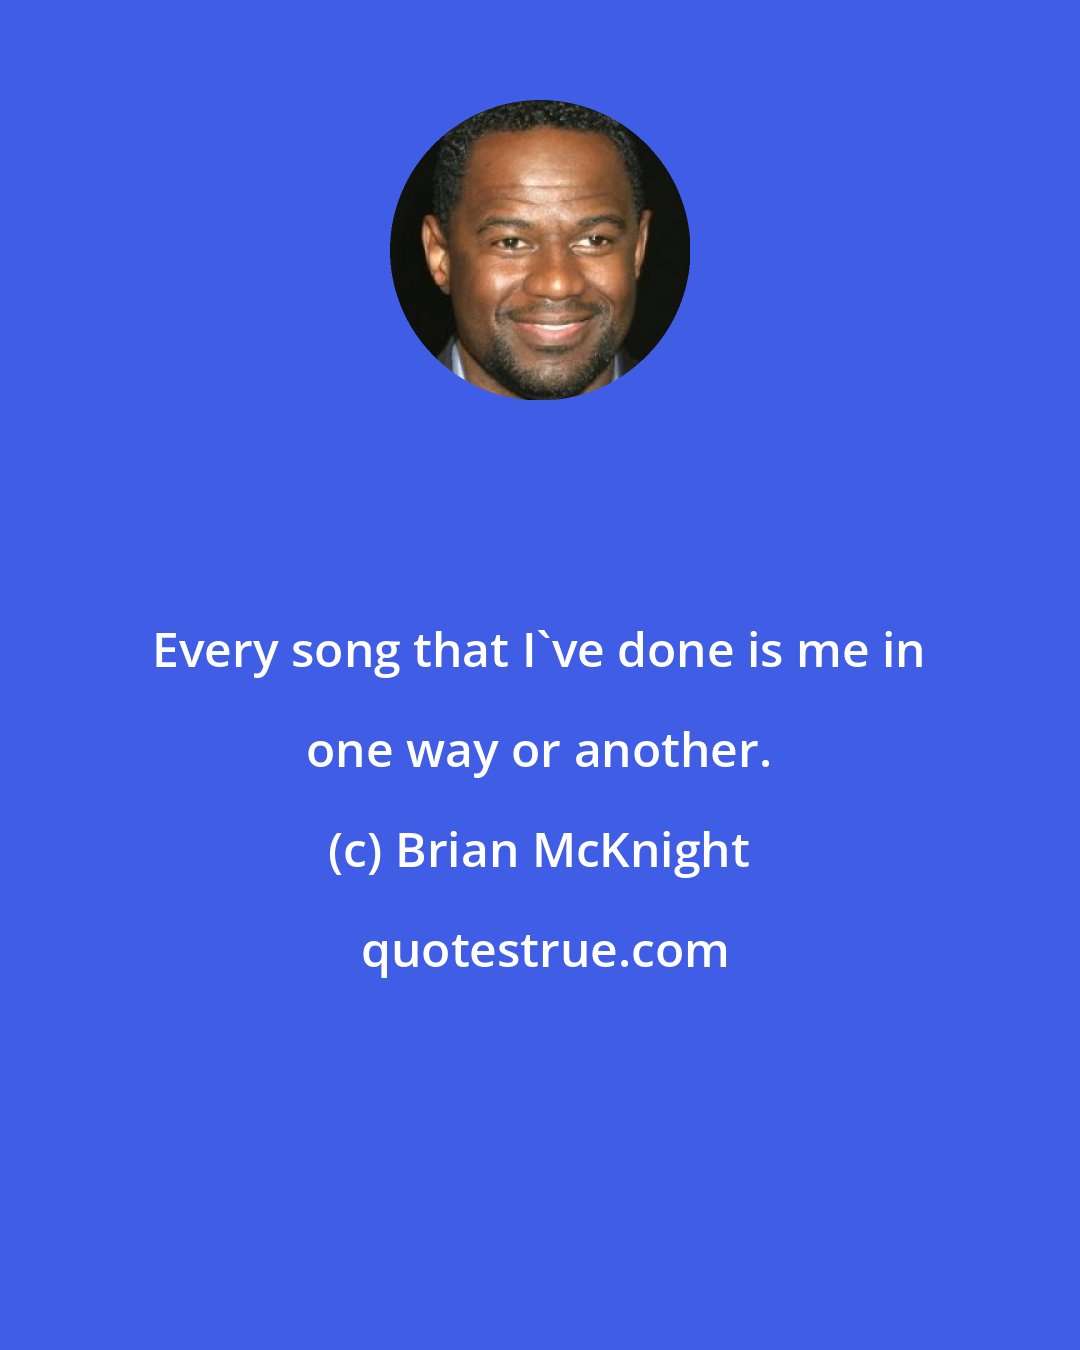 Brian McKnight: Every song that I've done is me in one way or another.